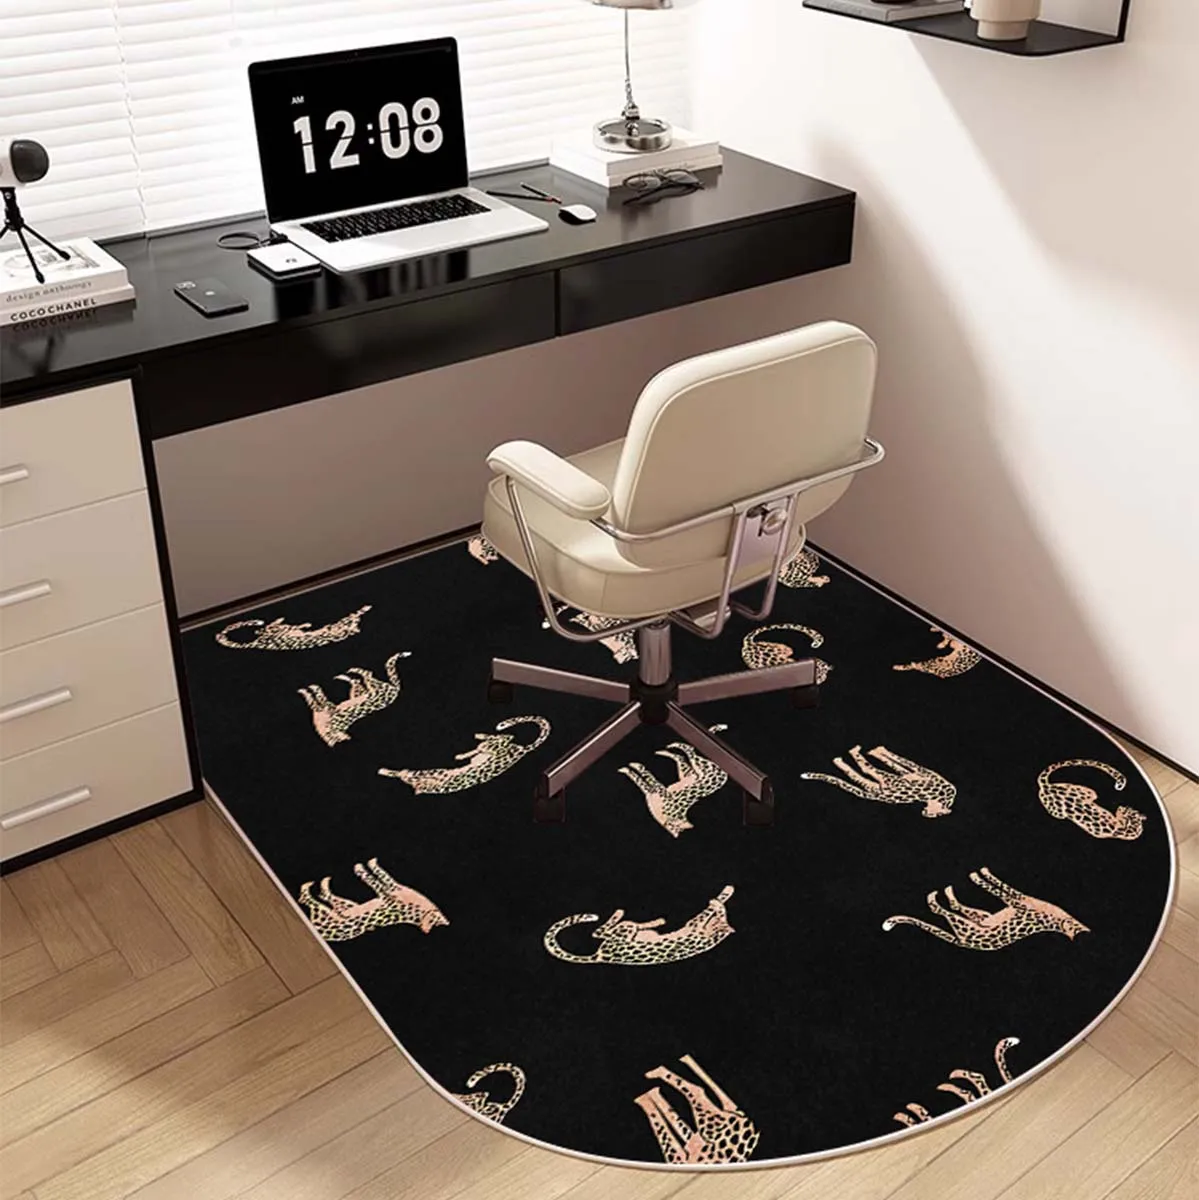 Study Computer Chair Floor Mat Non-slip Large Rounded Corner Carpet Living Room Bedroom Home Decoration Luxury Tiger Print Rug